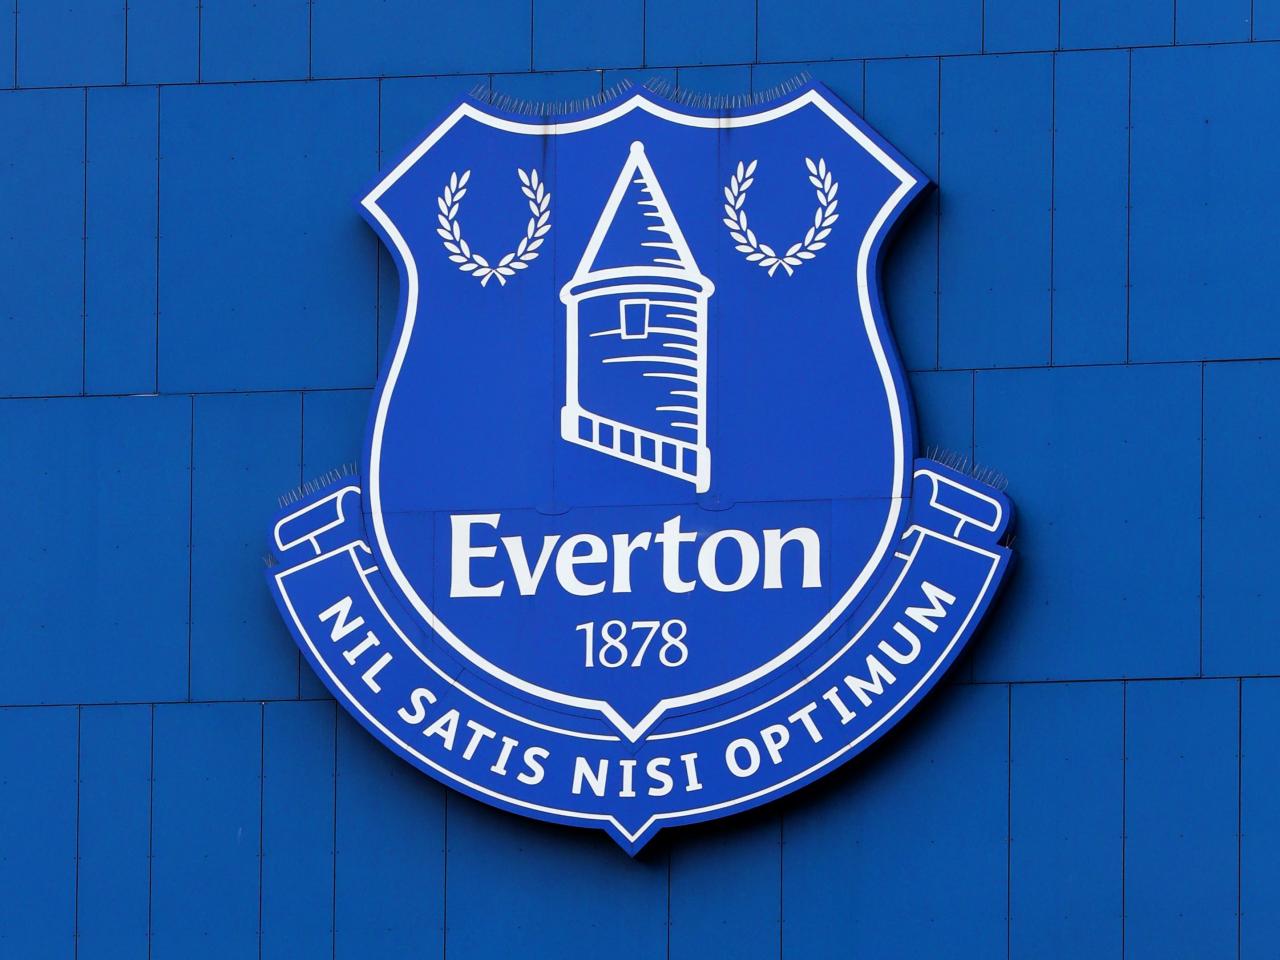 New Everton stadium gets planning permission green light | The Independent